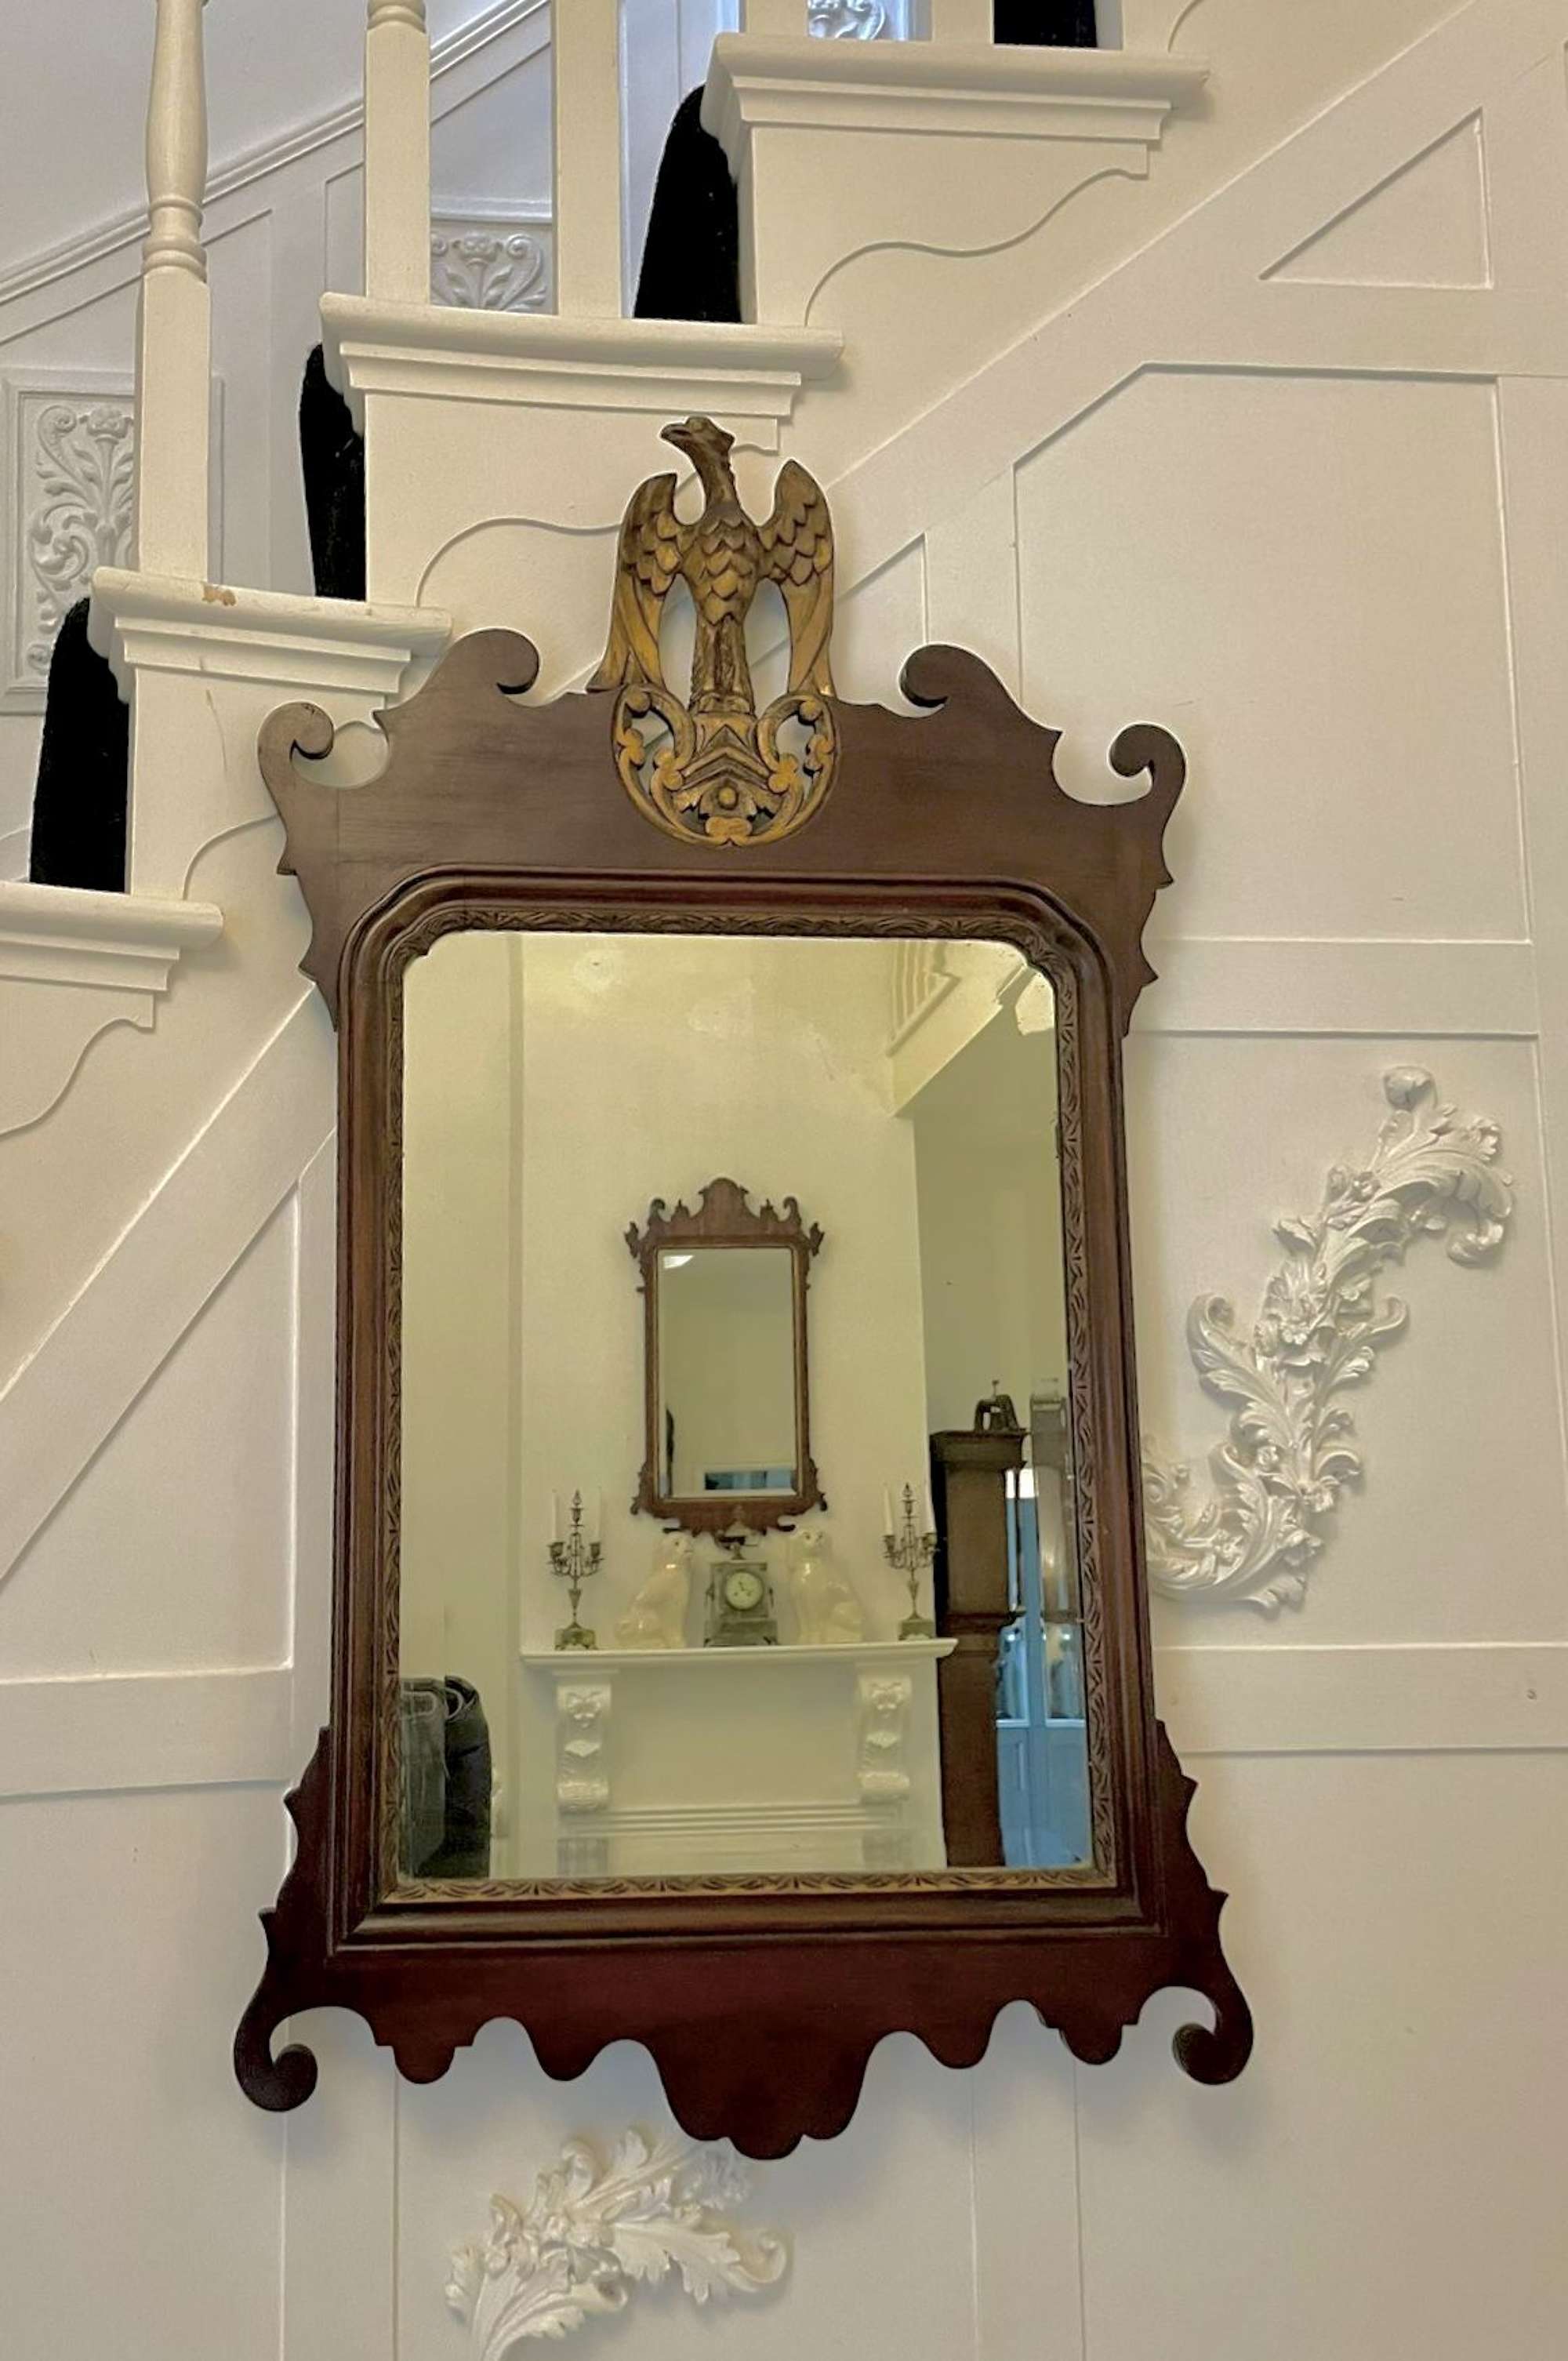 Large Antique Edwardian Inlaid and Gilt Mahogany Fretted Wall Mirror